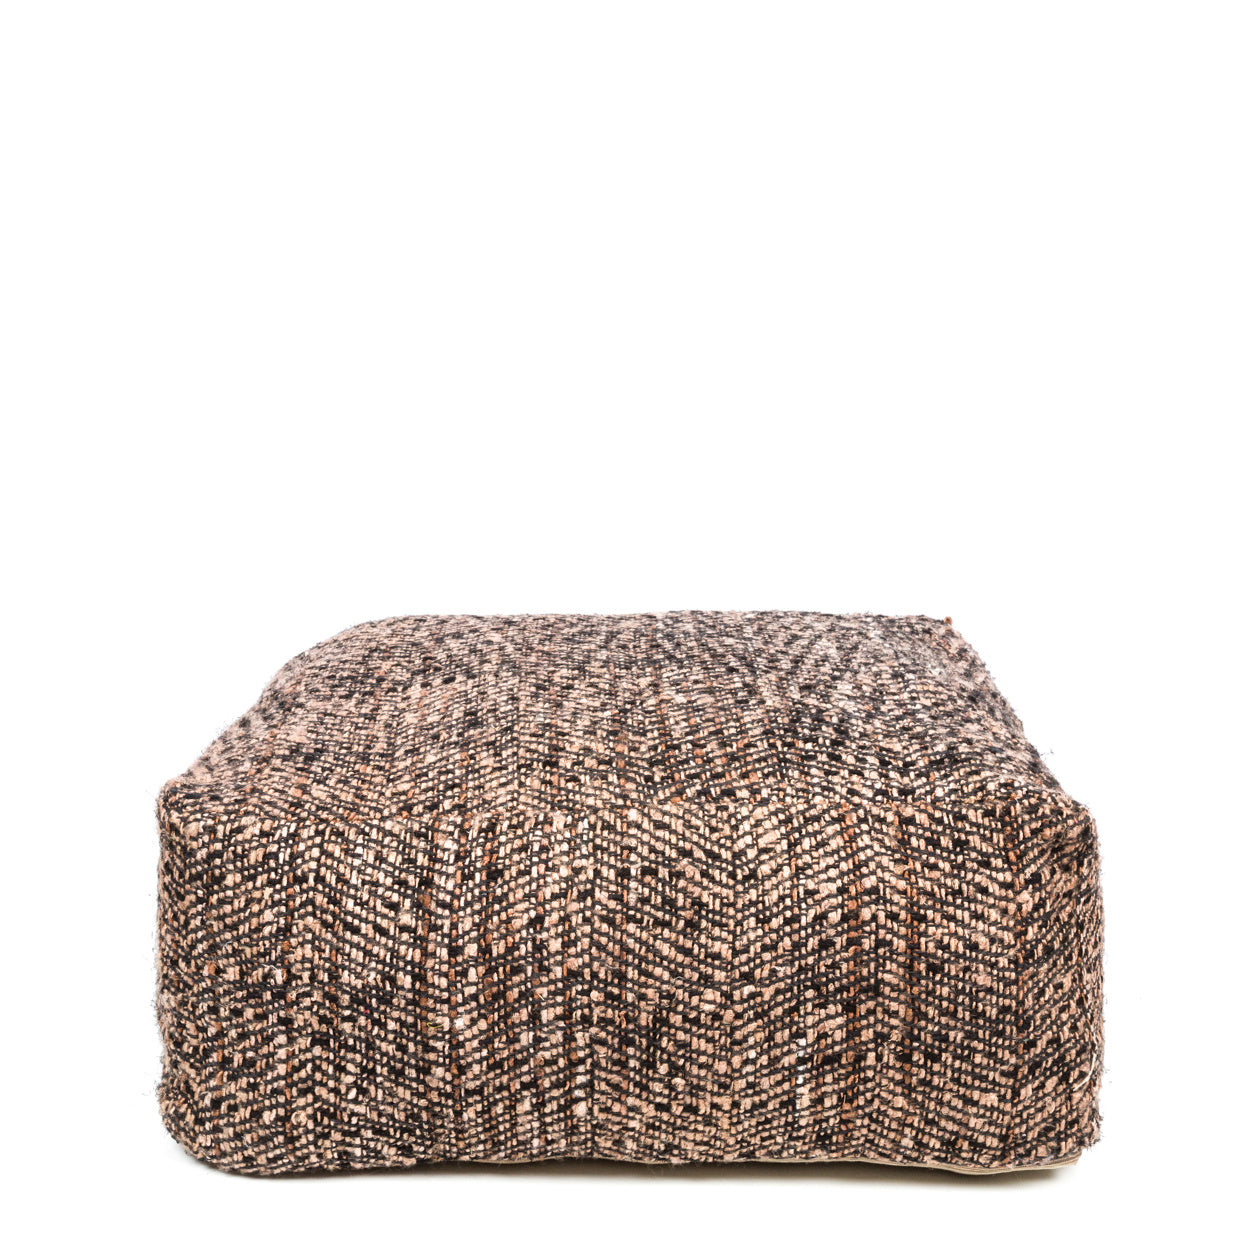 Oh My Gee pouf - black copper